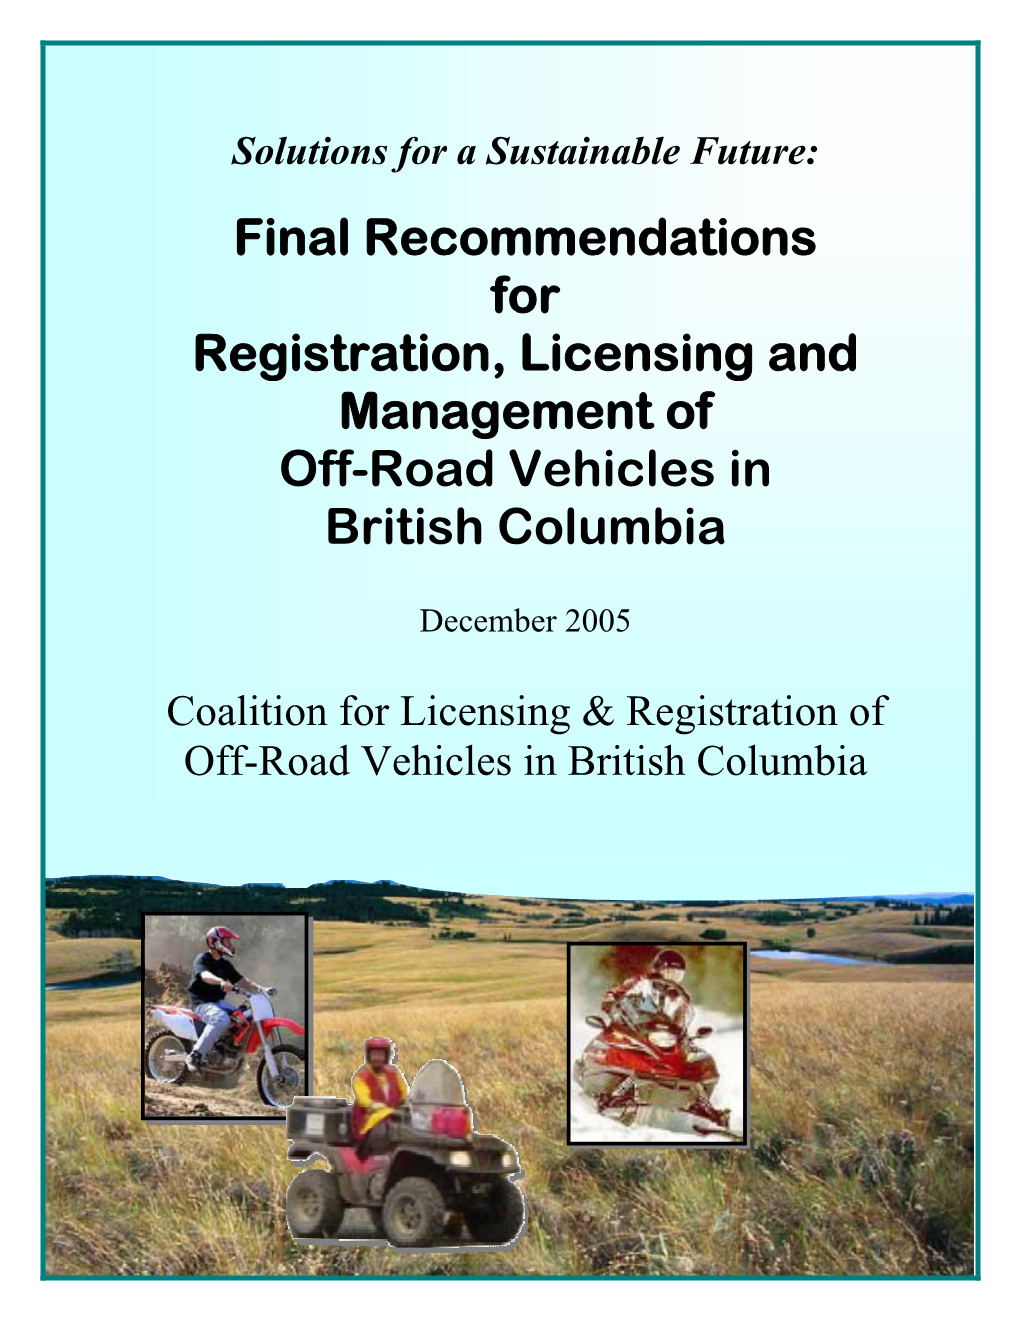 BC ORV Final Recommendations